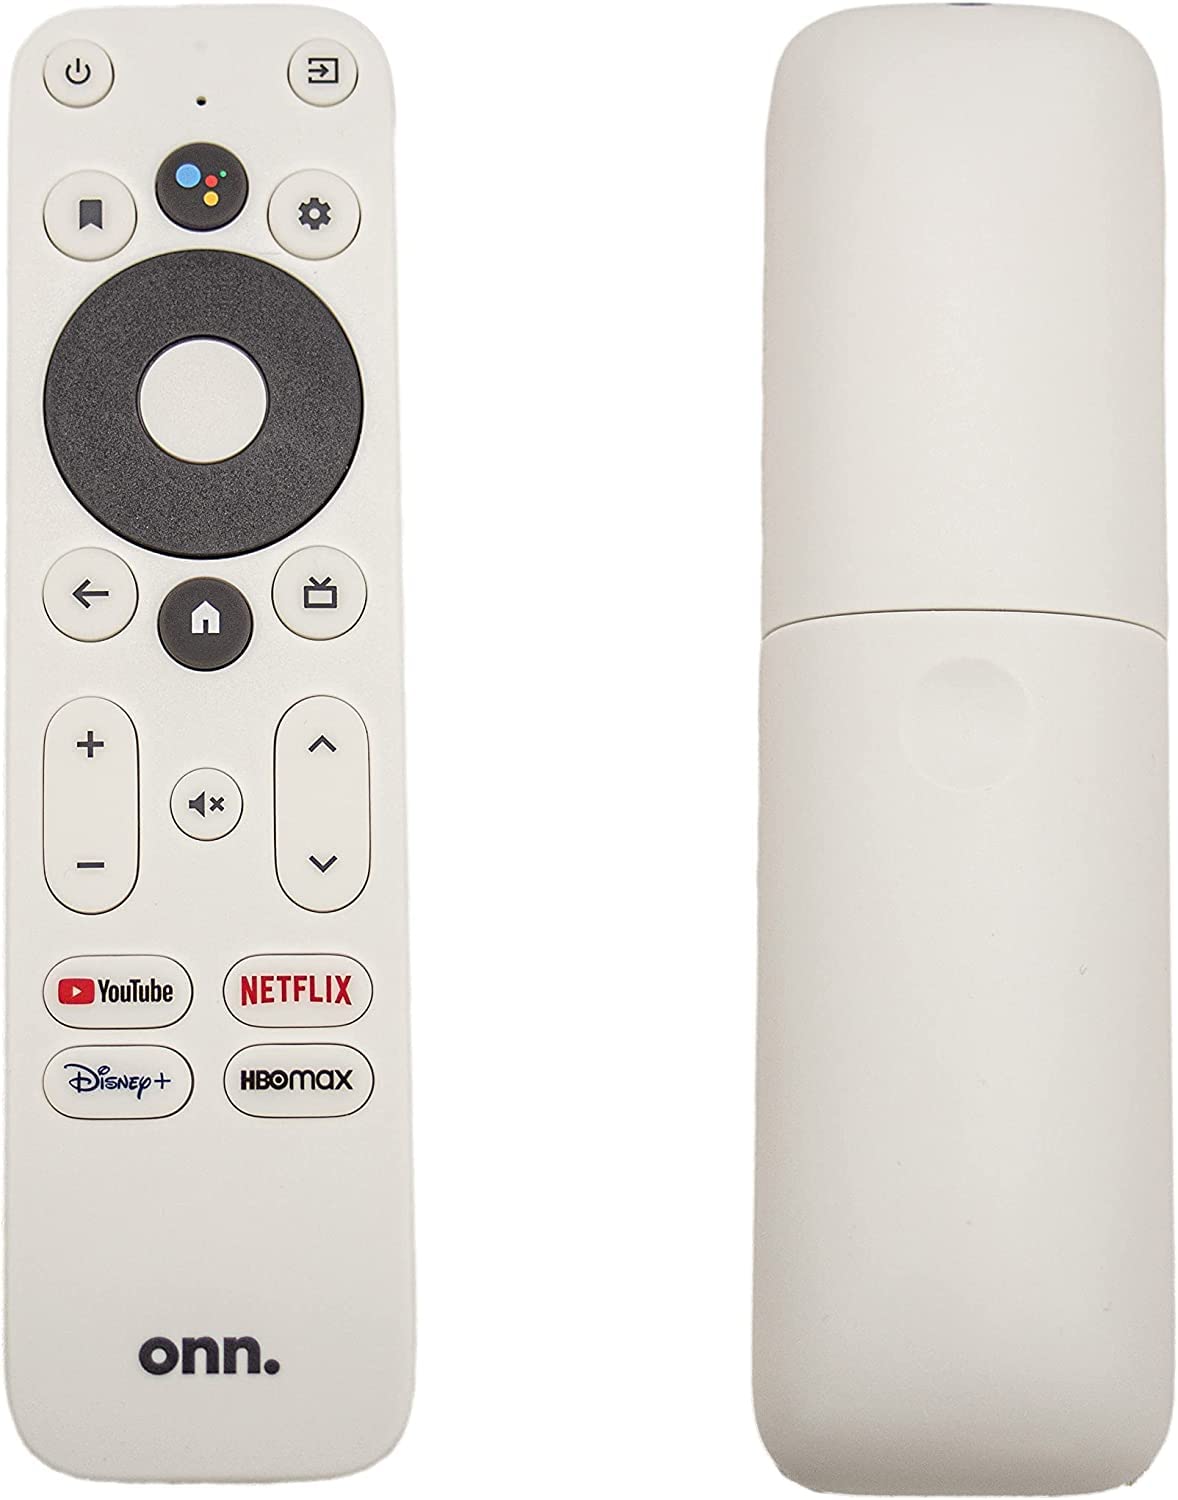 onn_android_tv_box_remote